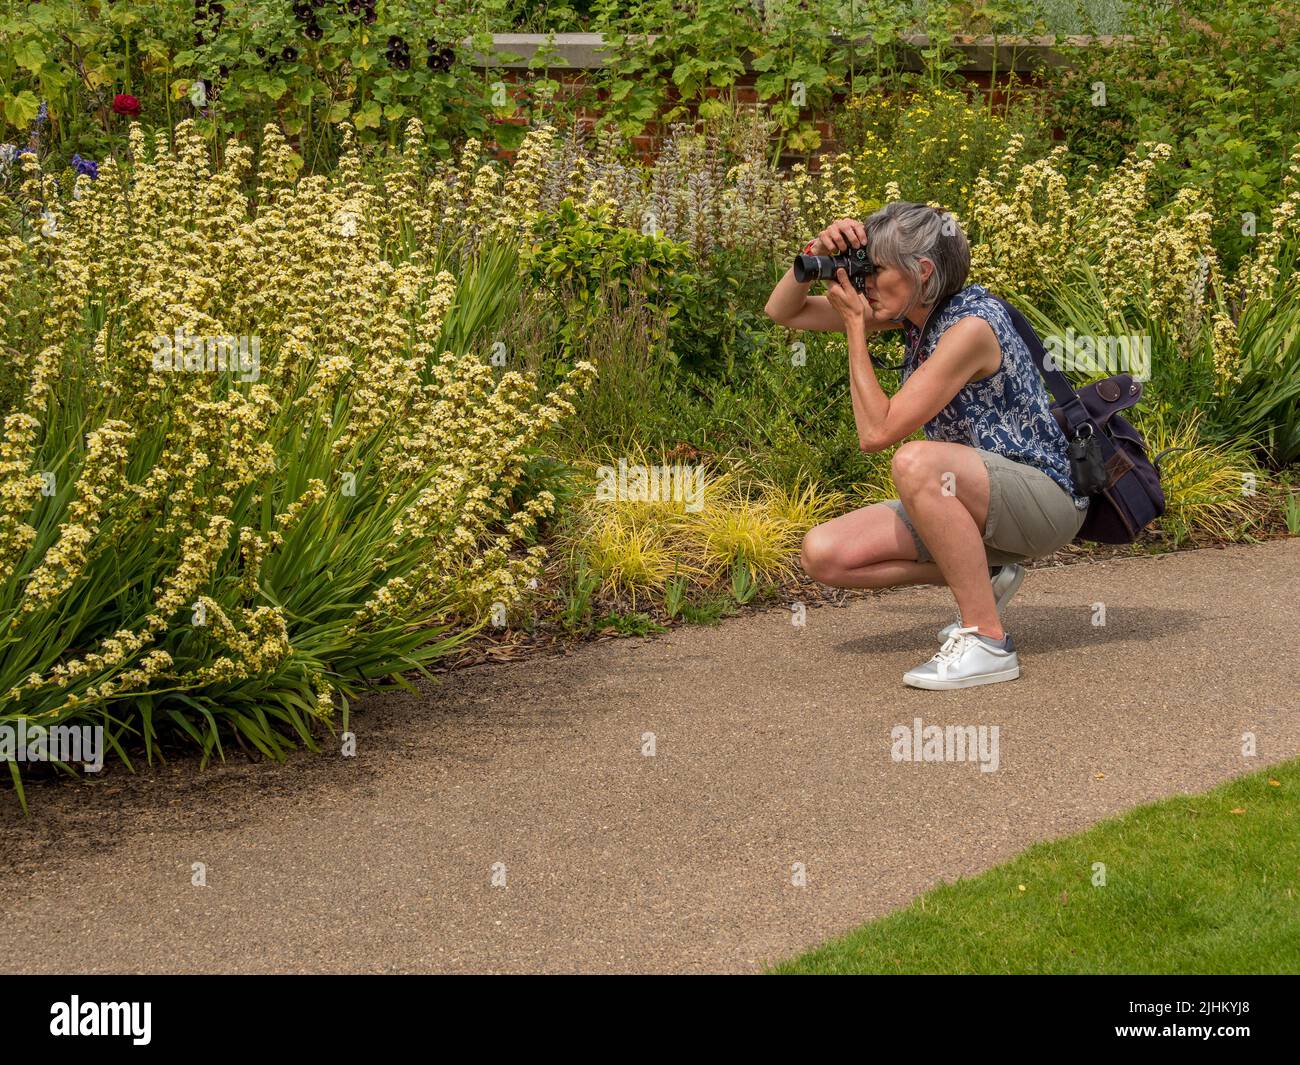 Casually dressed middle-aged caucasian female, squatting down photographing Sisyrinchium flowers growing in a  UK garden. Stock Photo